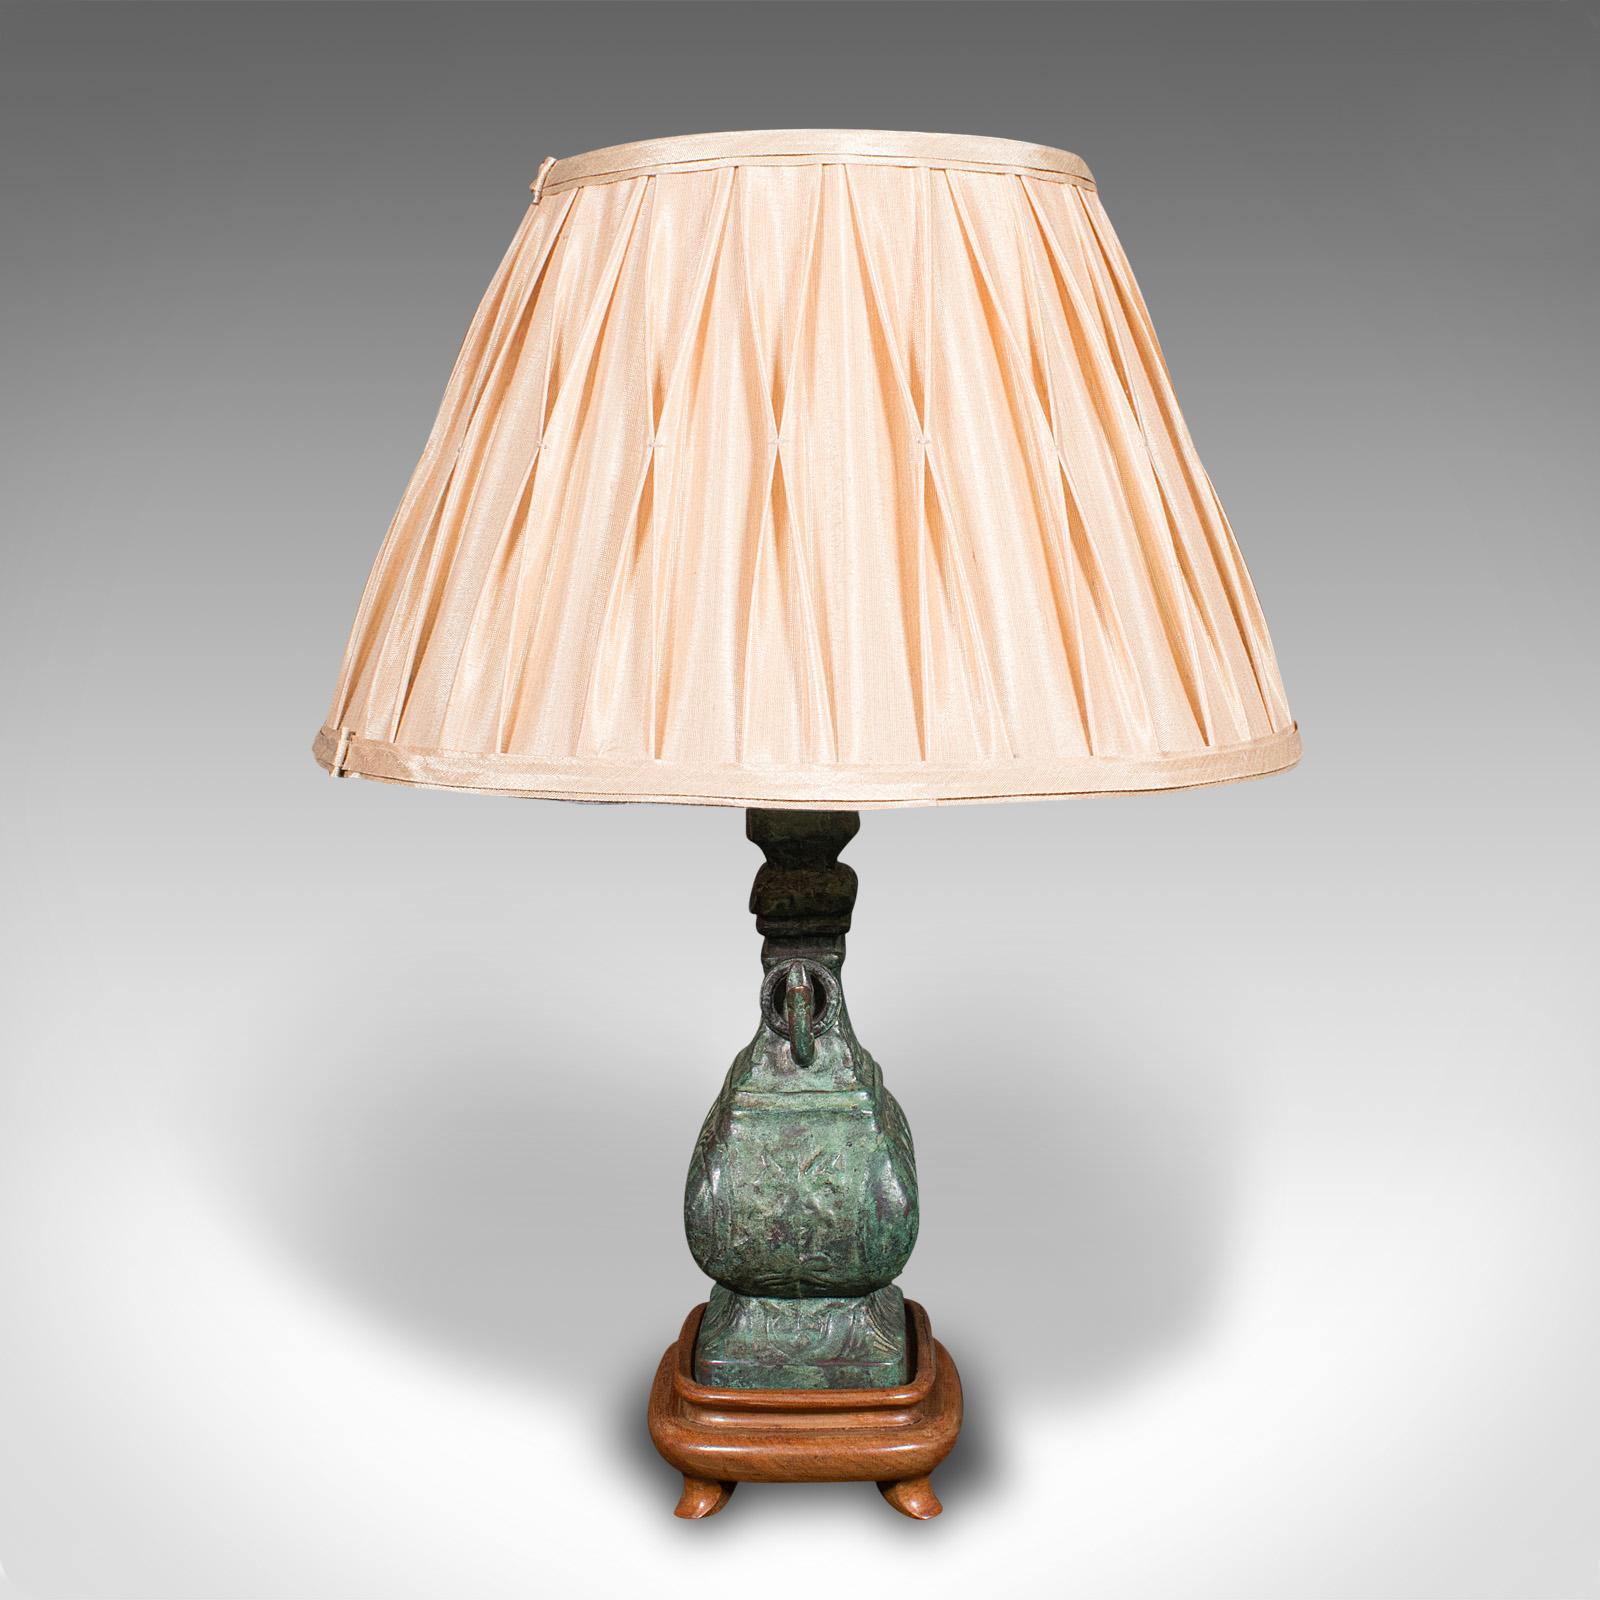 Vintage Decorative Table Lamp, Chinese, Bronze, Accent Light, Mid Century, 1960 1